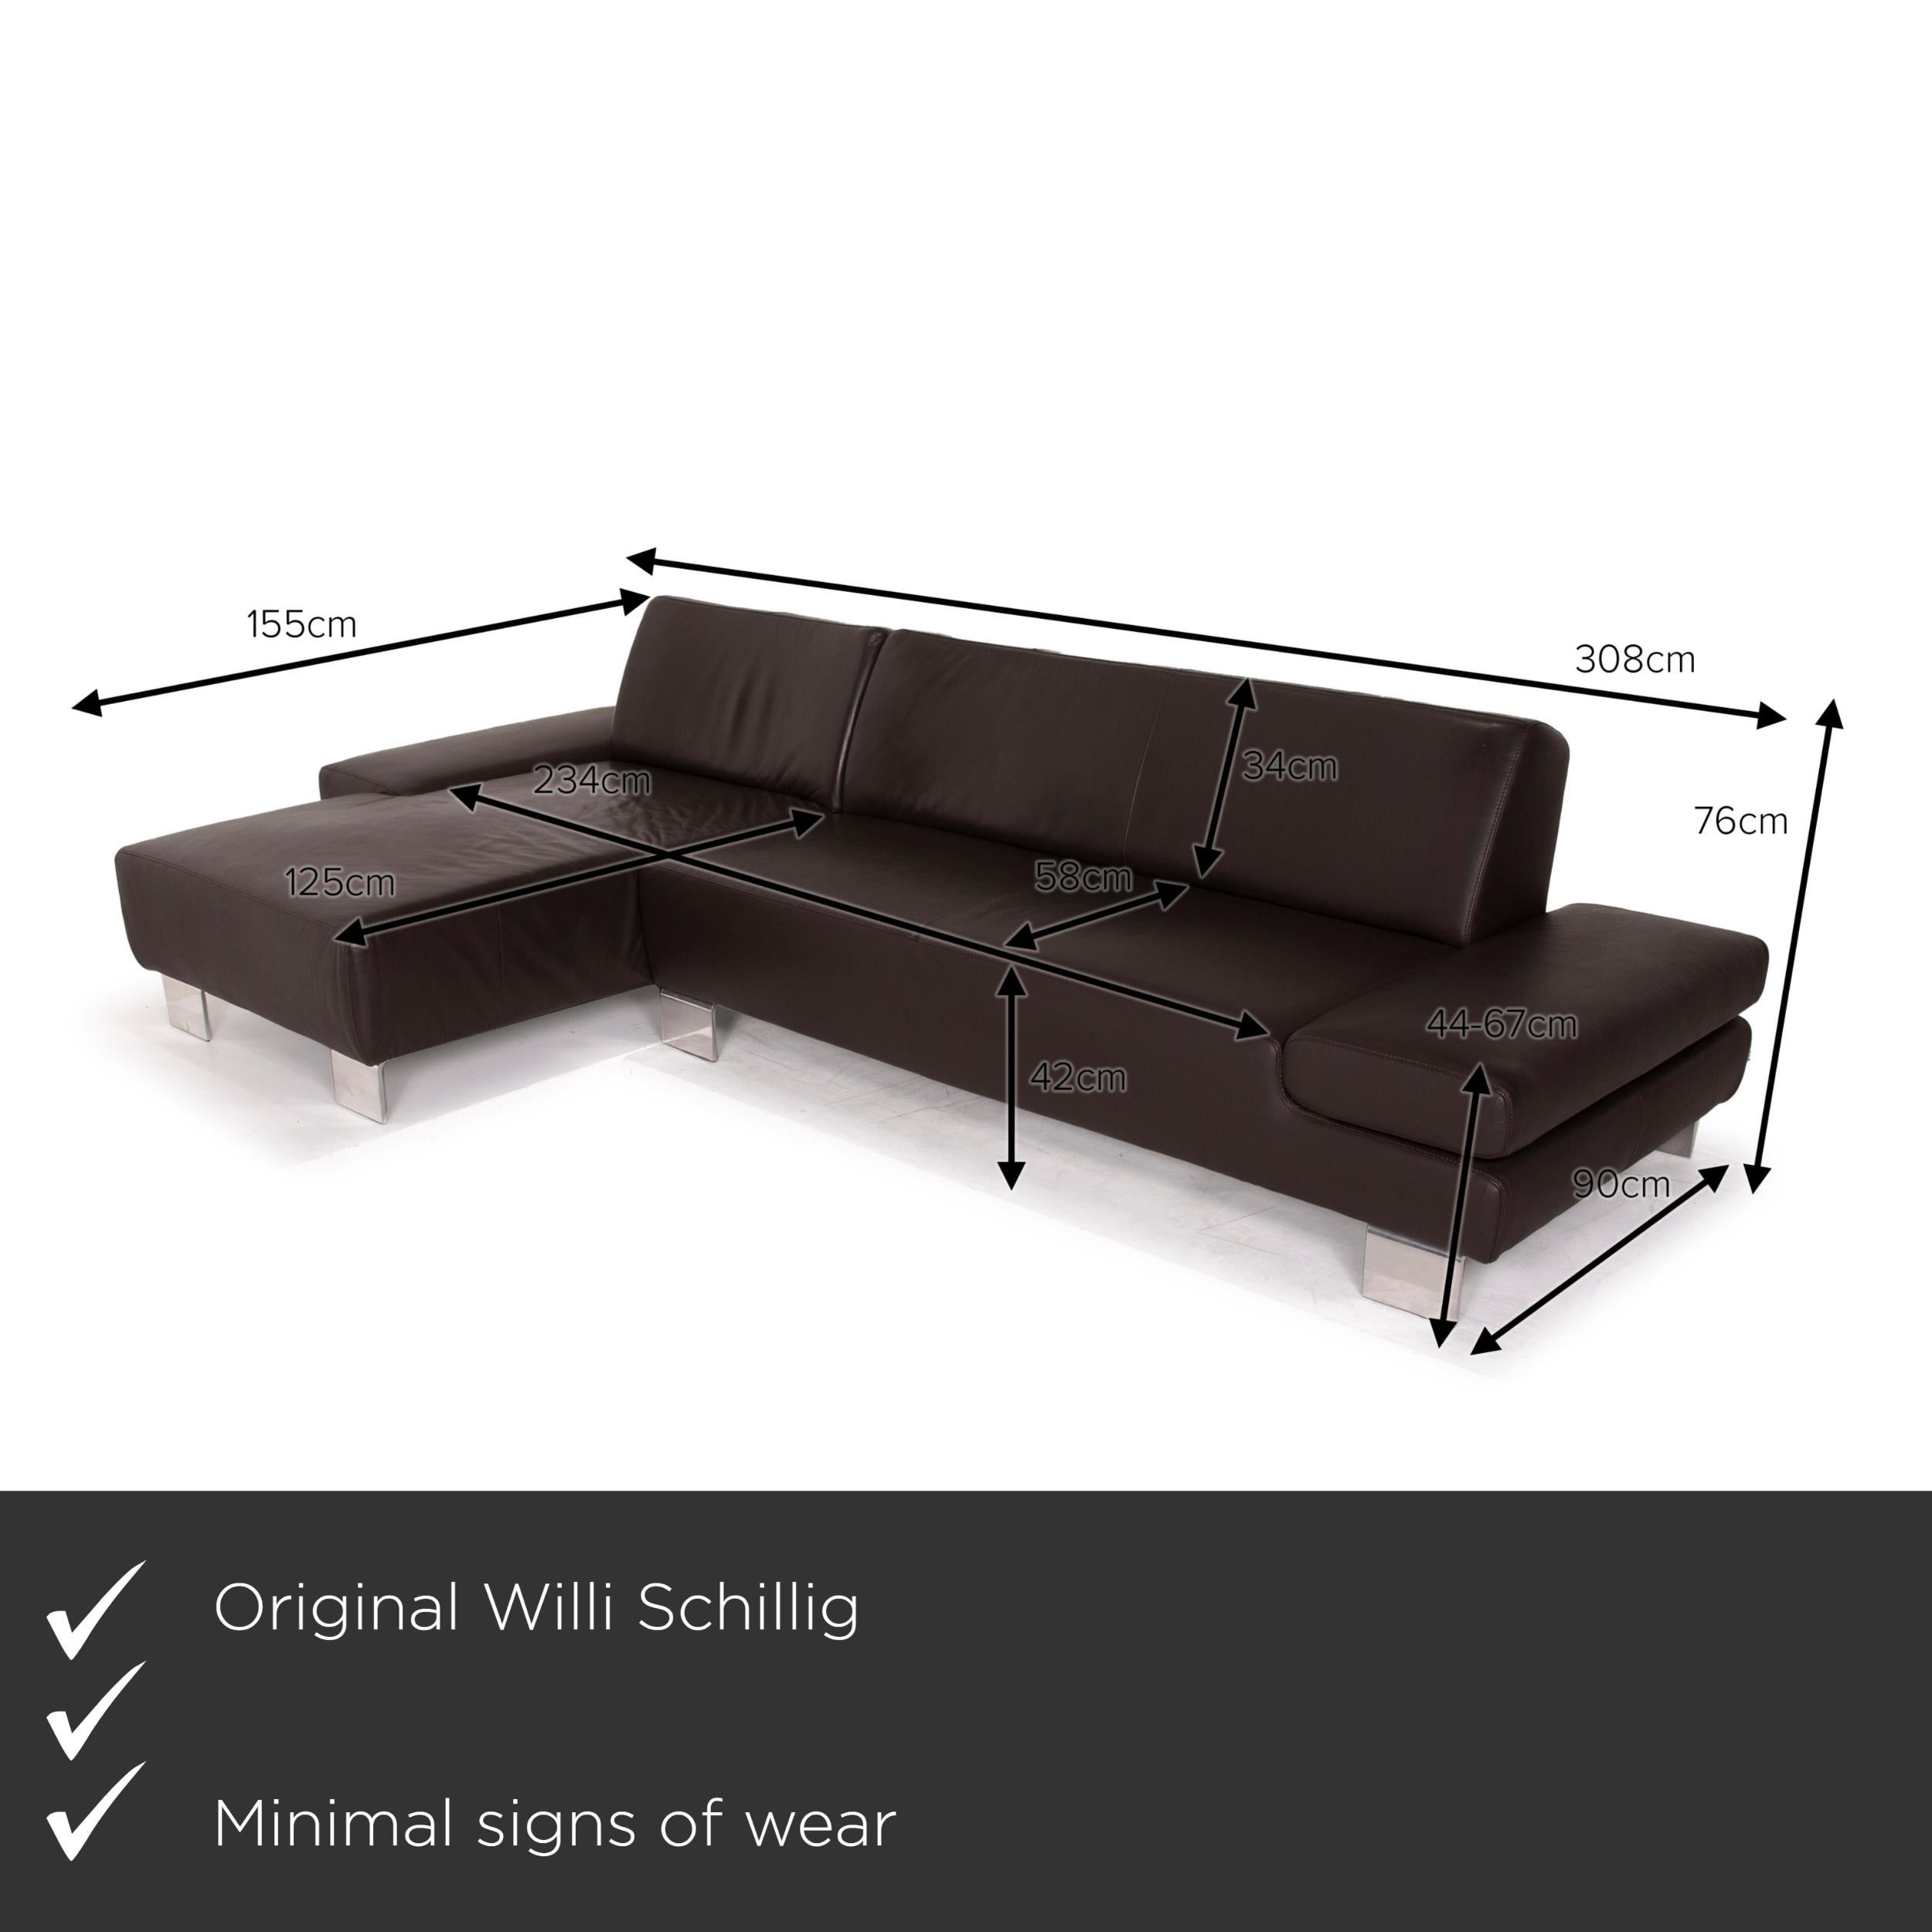 We present to you a Willi Schillig Taboo leather sofa brown corner sofa three-seater function.


 Product measurements in centimeters:
 

Depth: 155
Width: 155
Height: 76
Seat height: 42
Rest height: 44
Seat depth: 125
Seat width: